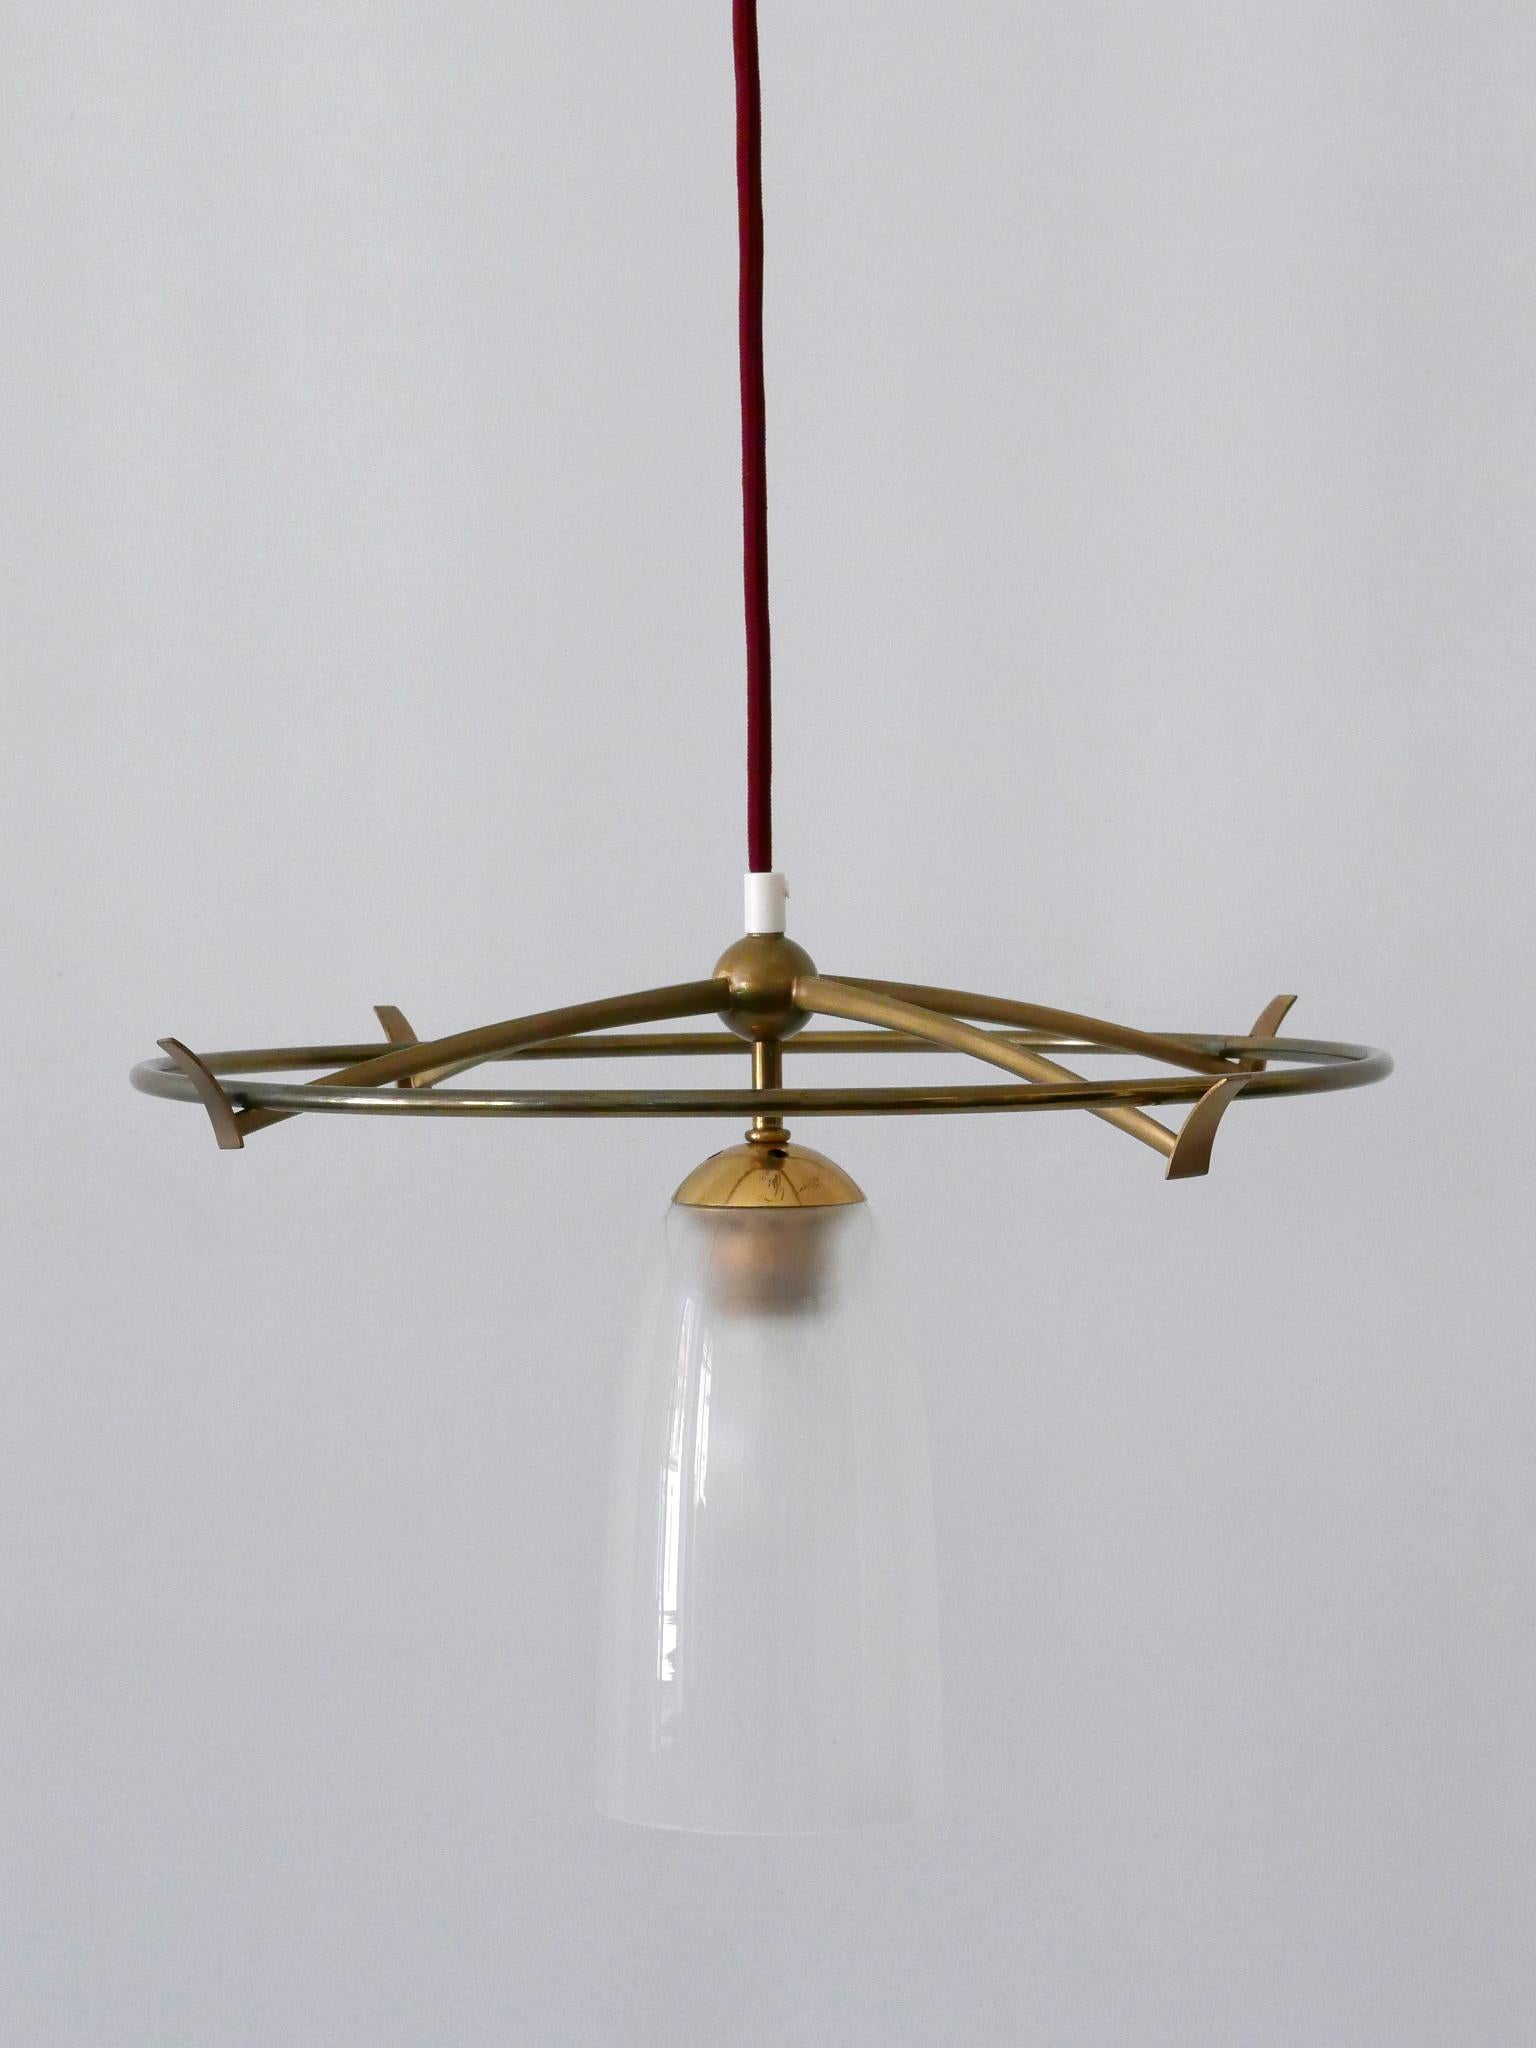 Extremely rare and elegant Mid-Century Modern space age UFO pendant lamp or hanging light. Designed and manufactured probably in Germany, 1950s.

Executed in brass and milk glass, the lamp comes with 1 x E27 / E26 Edison screw fit bulb holder, is